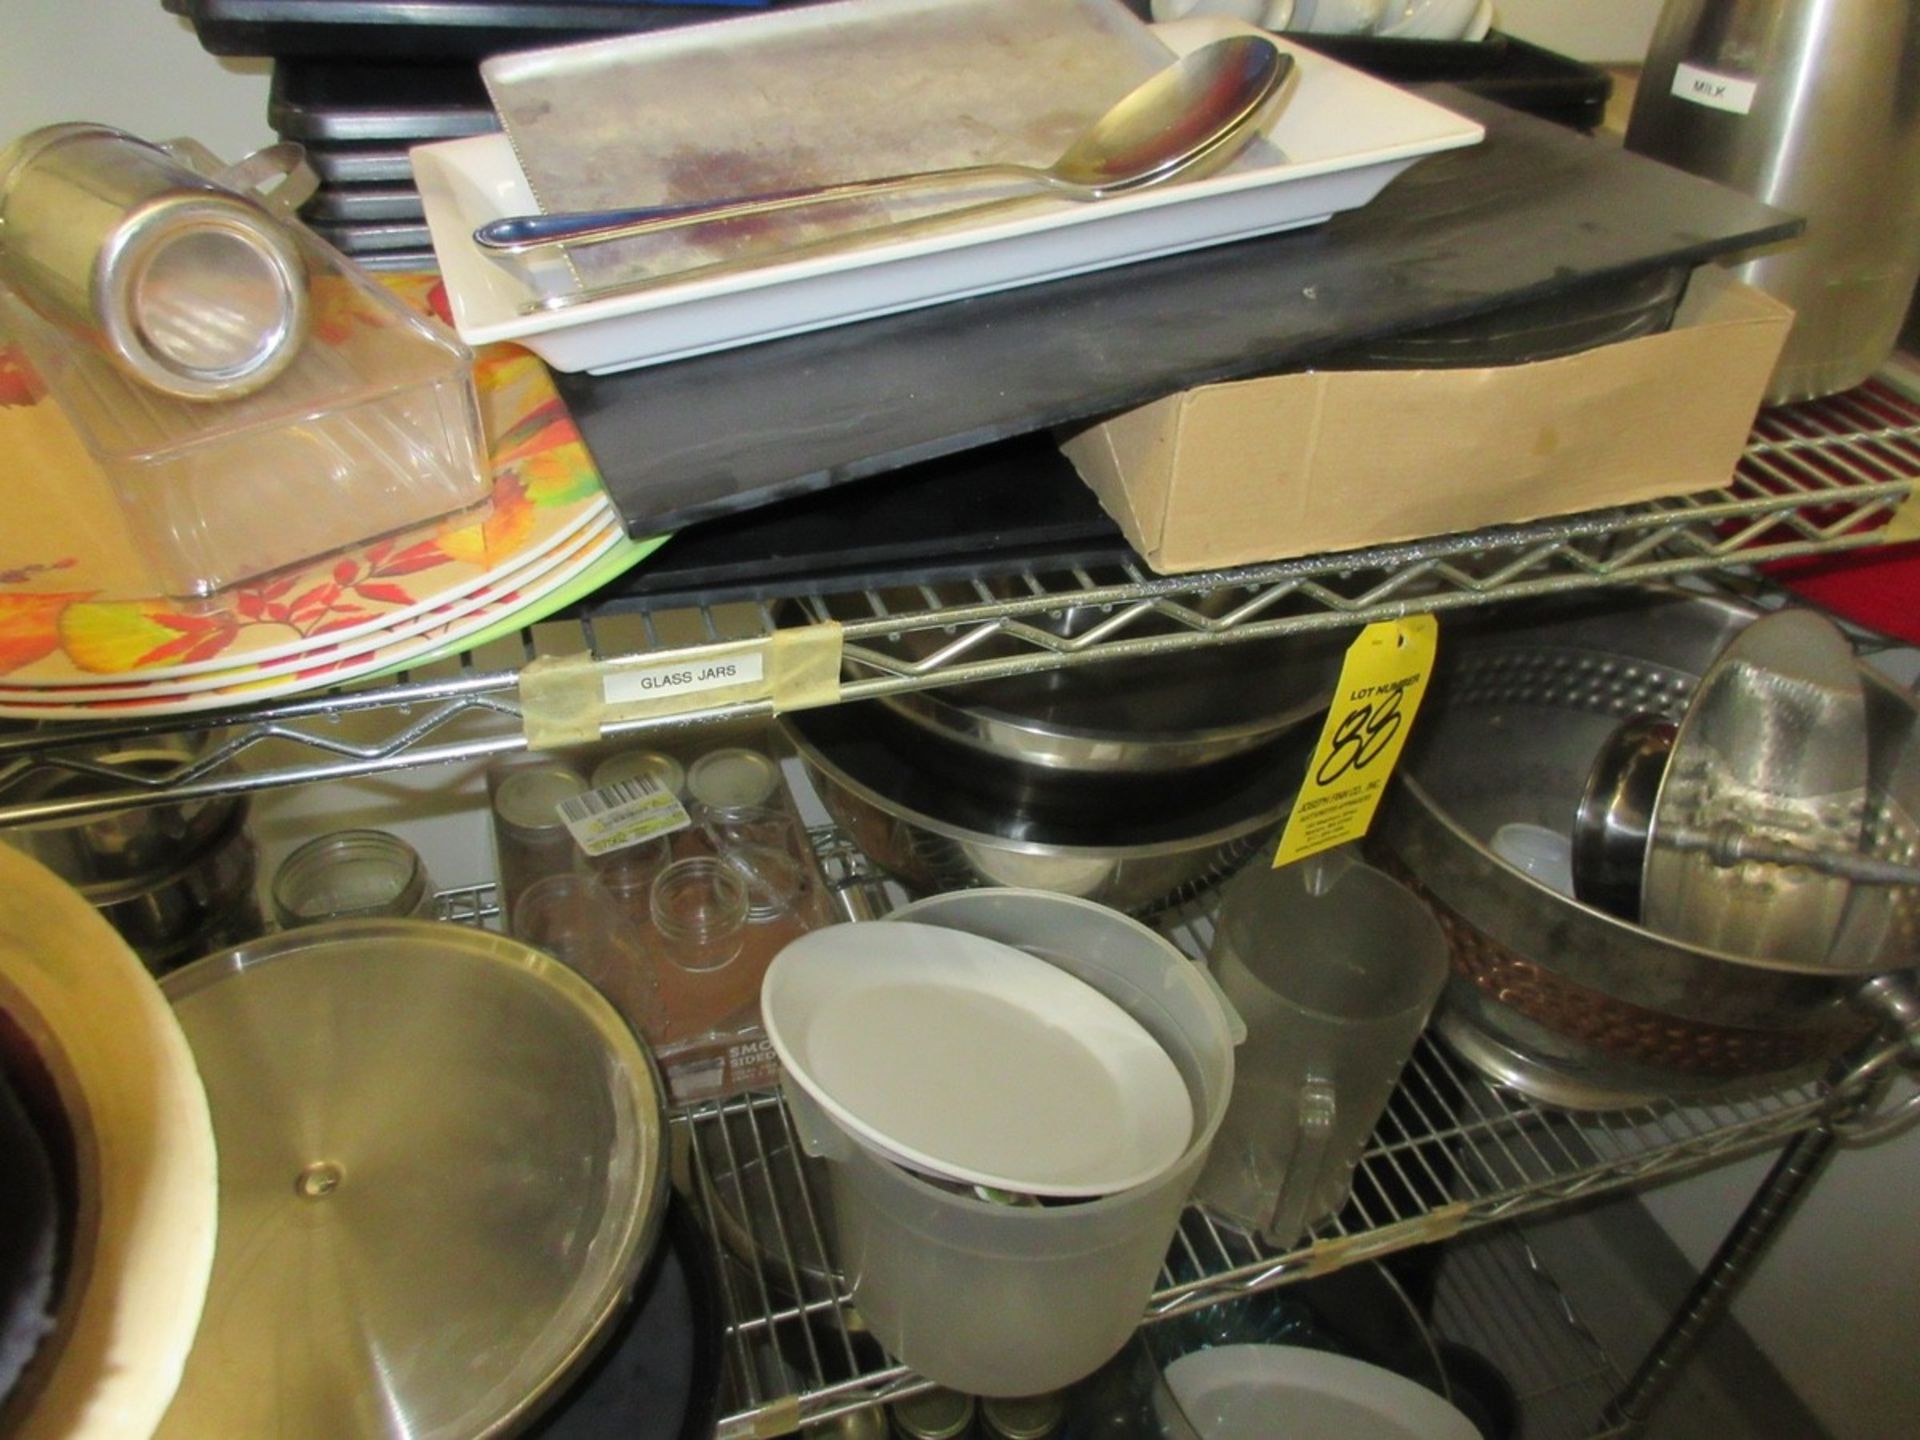 LOT Contents of Room Including Port. Wire Chrome Bakers Rack, Cake Plate, Pastry Dish, Pitchers, Bow - Image 6 of 7